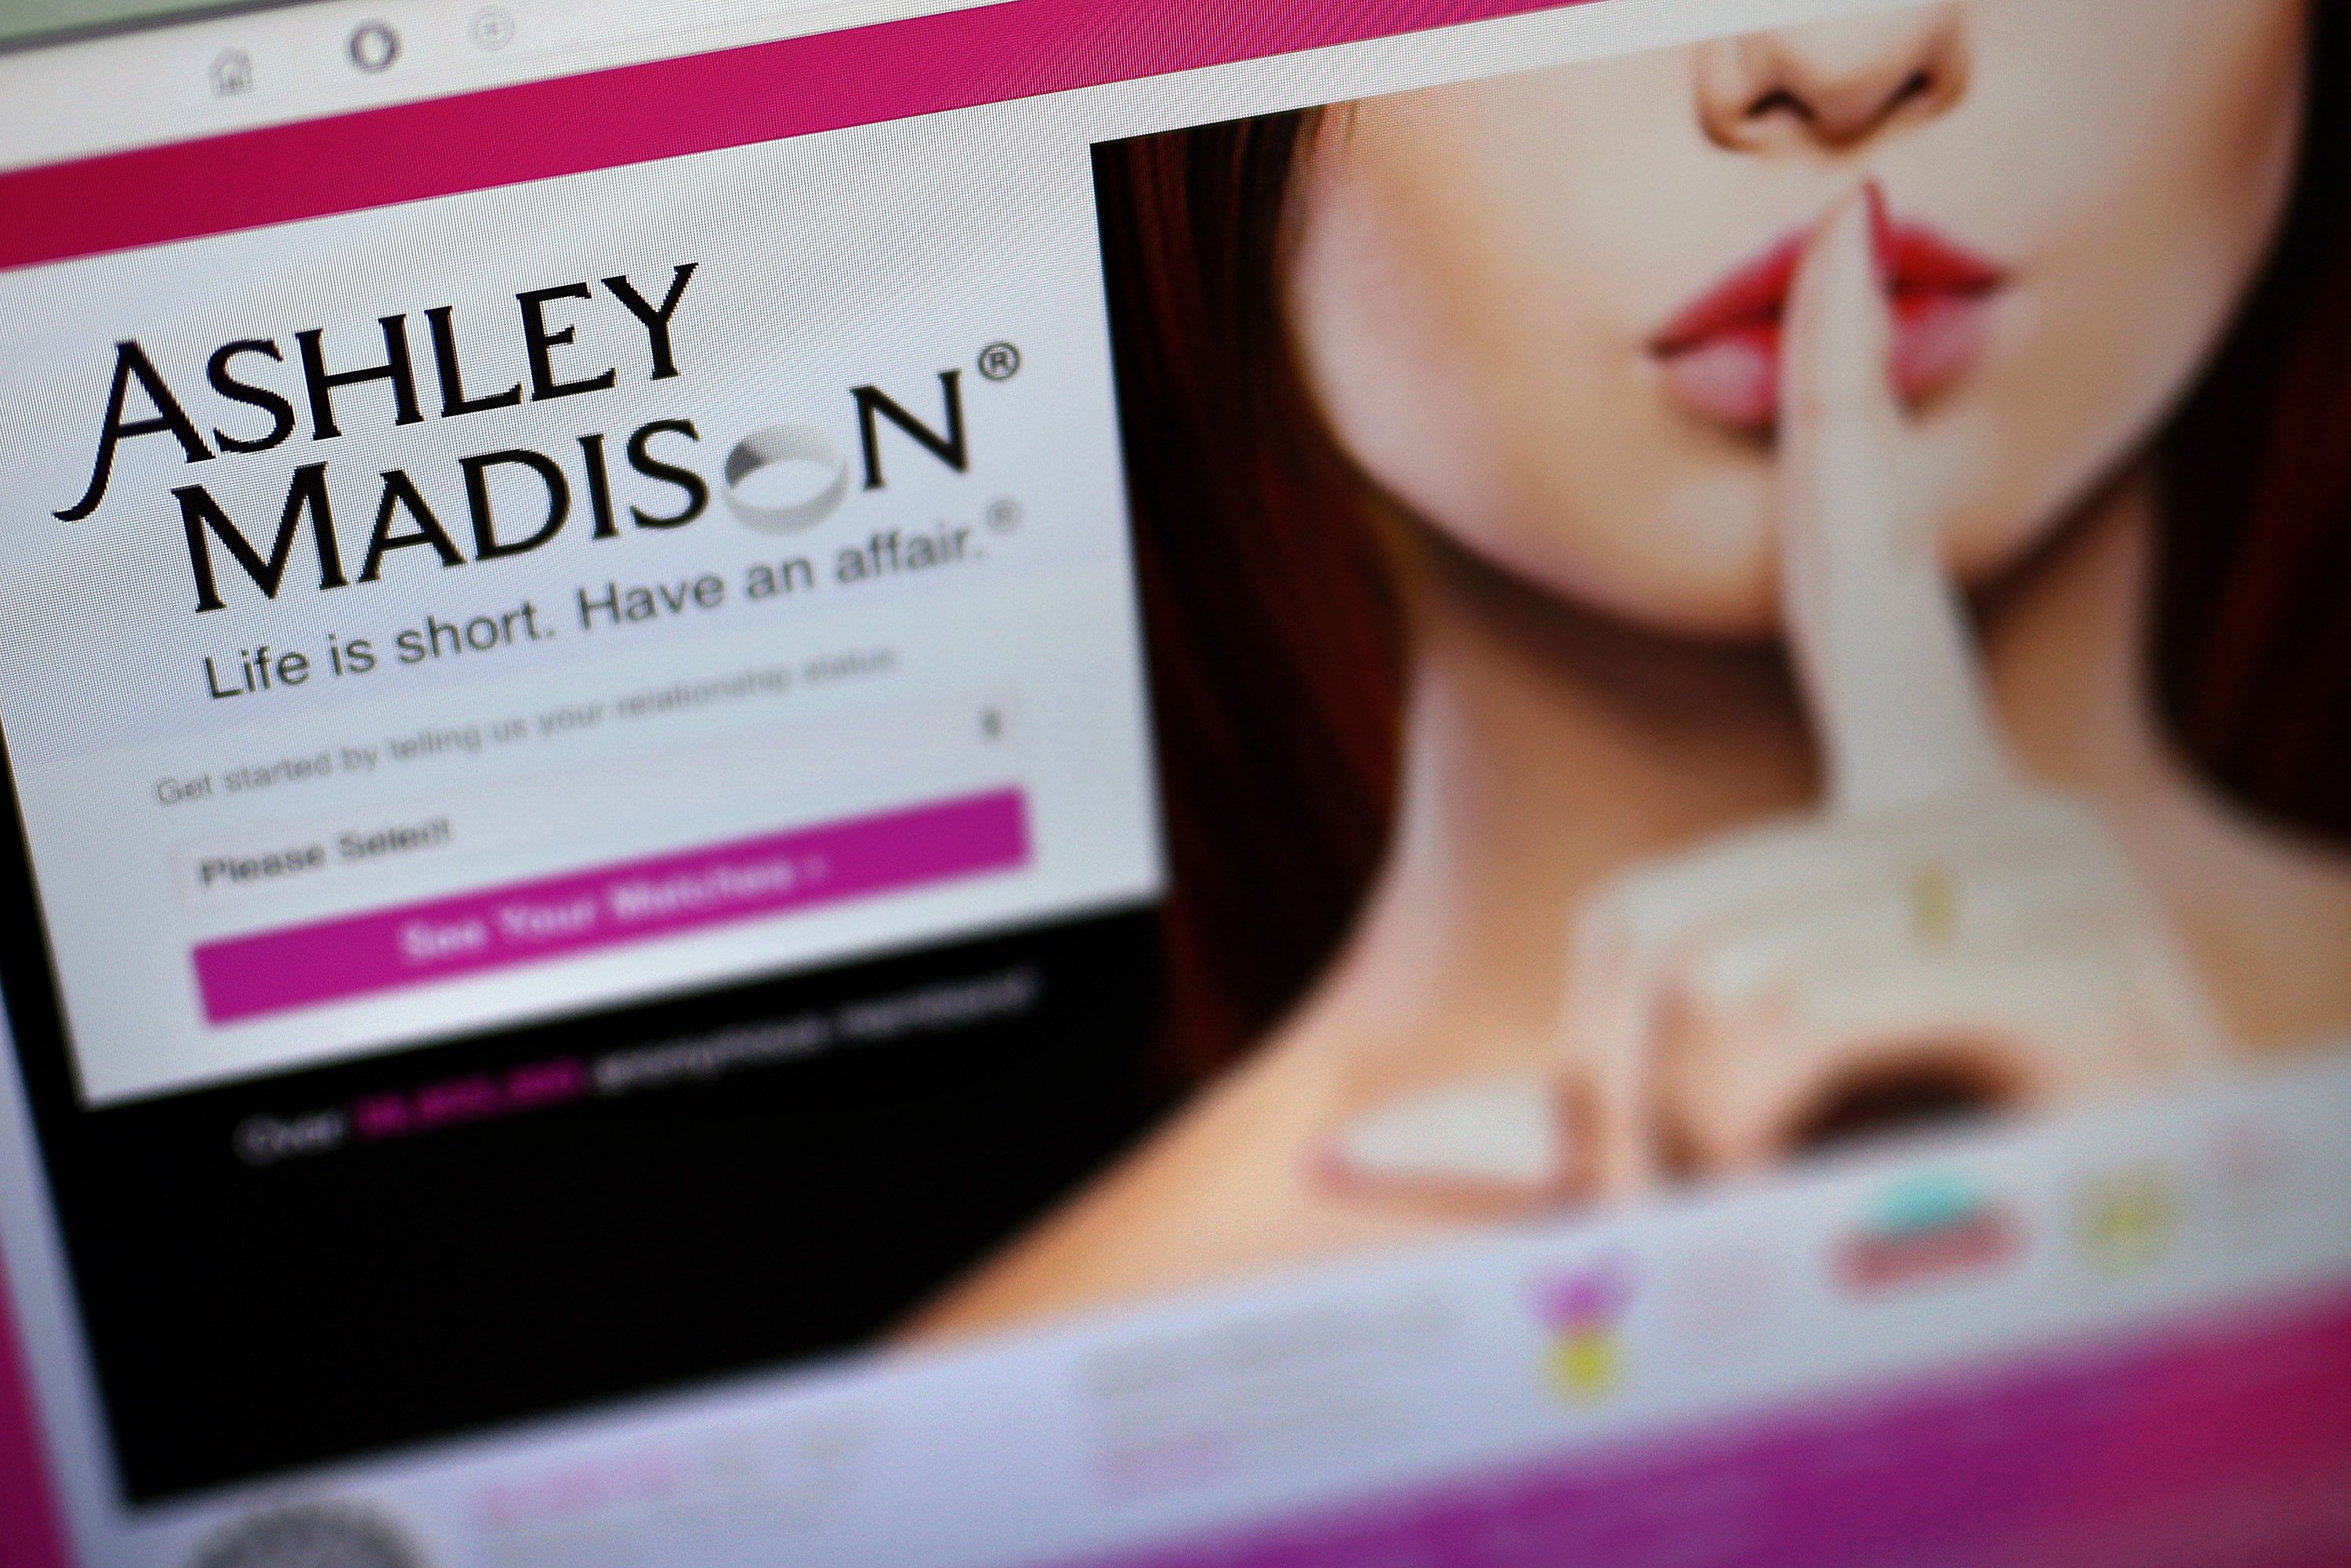 Which Celebrities Were Caught On Ashley Madison?